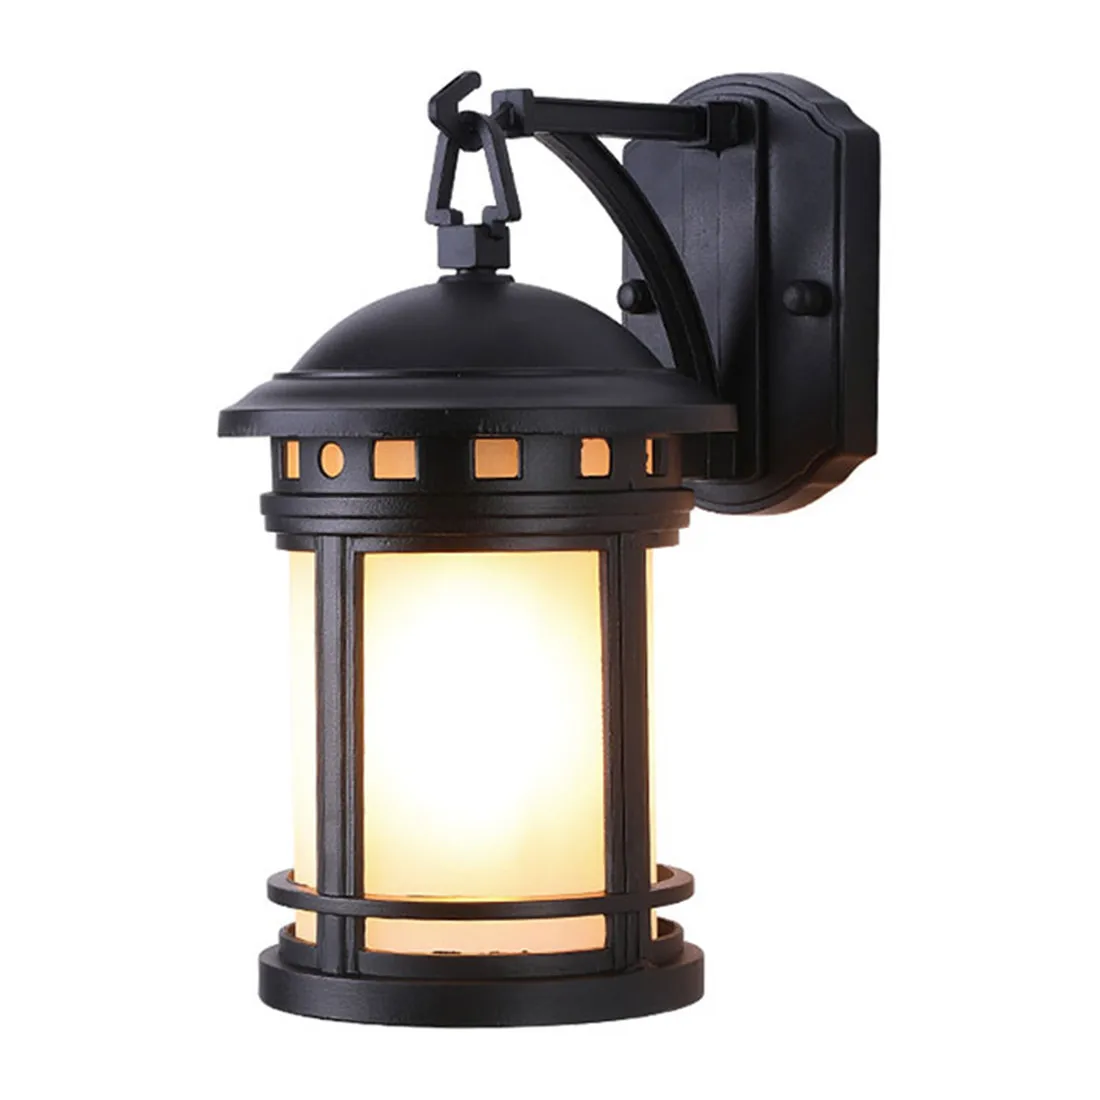 Outdoor Wall Mounted Light,Waterproof Security Wall Lantern Exterior Light Fixture for Entryways Yards Garage Front Porch